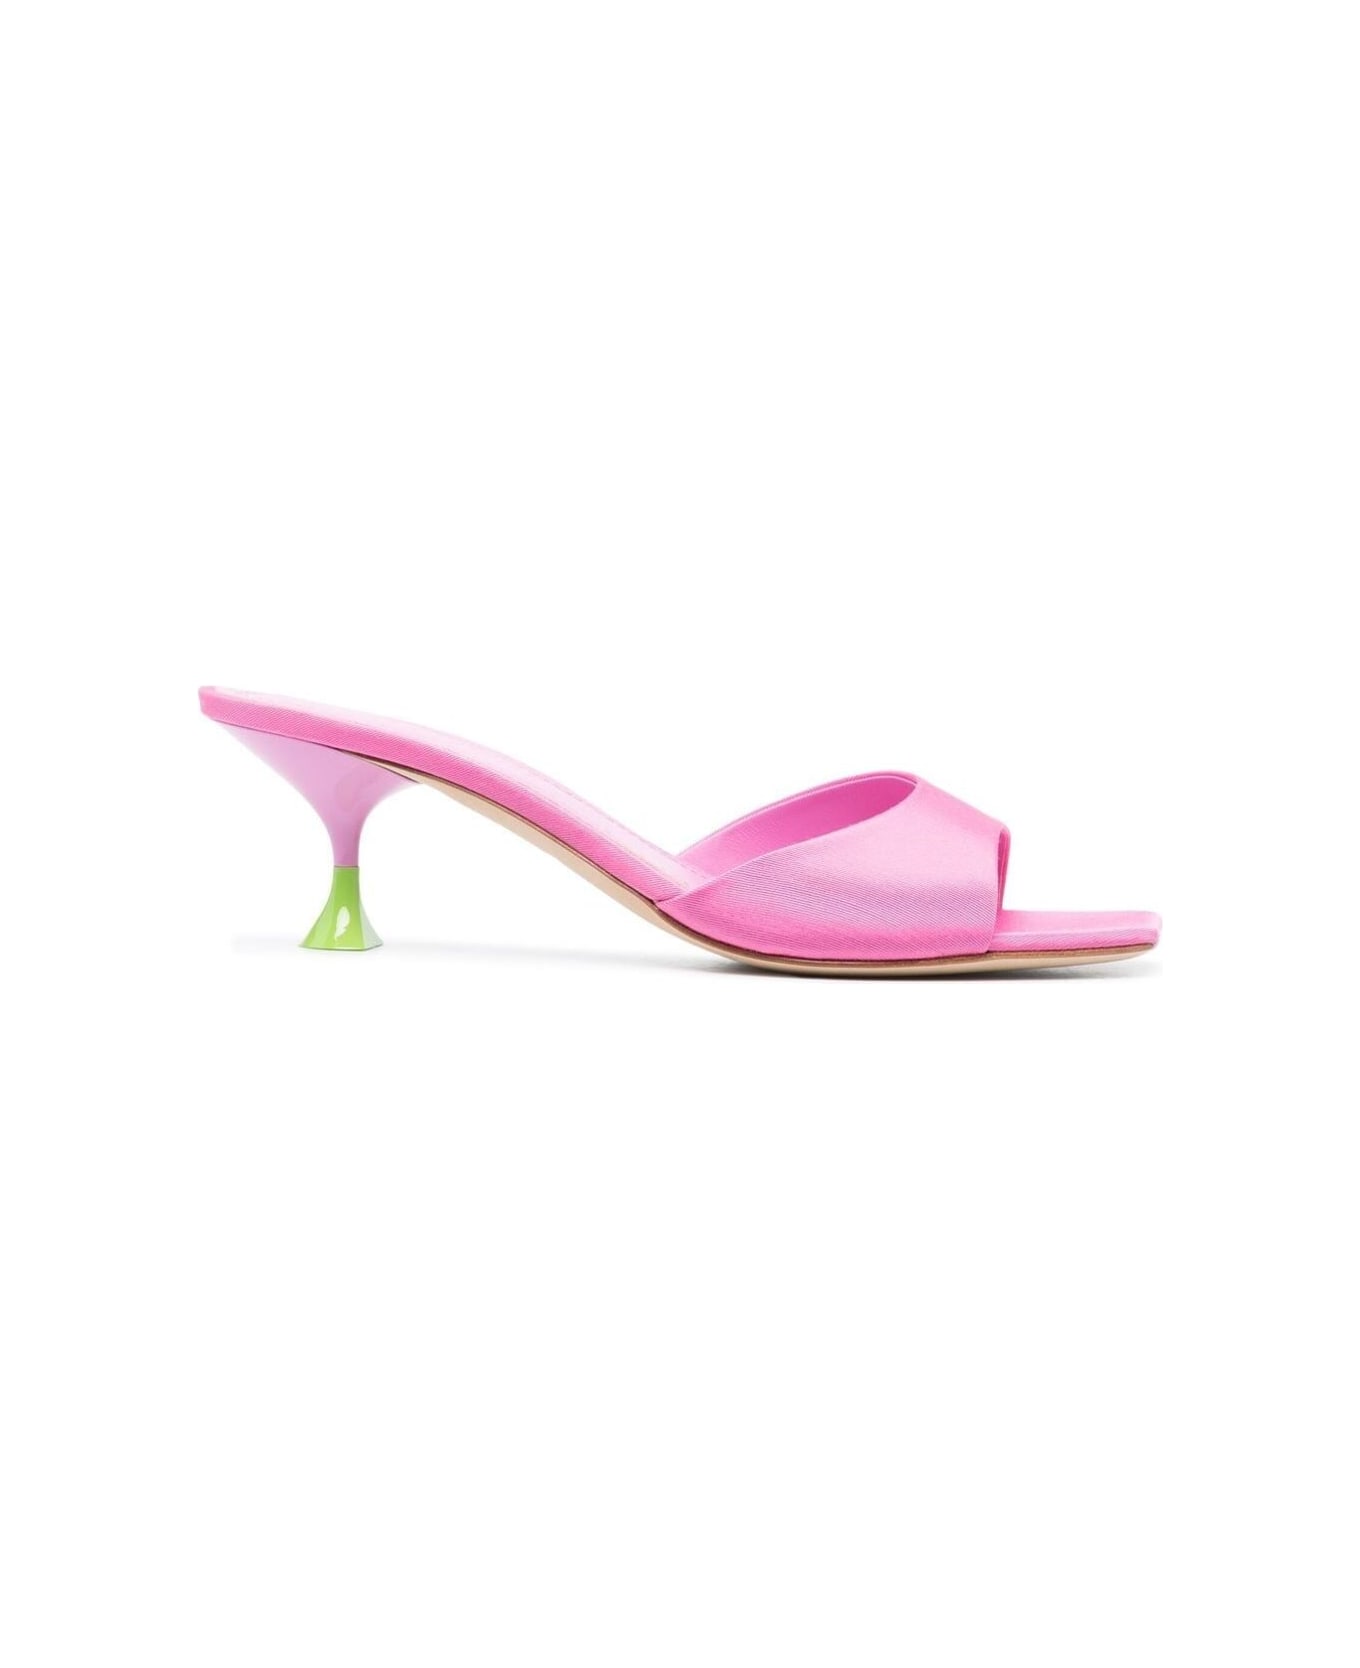 3JUIN 'kimi' Pink Sandals With Contrasting Enamelled Heel In Viscose Woman - Pink